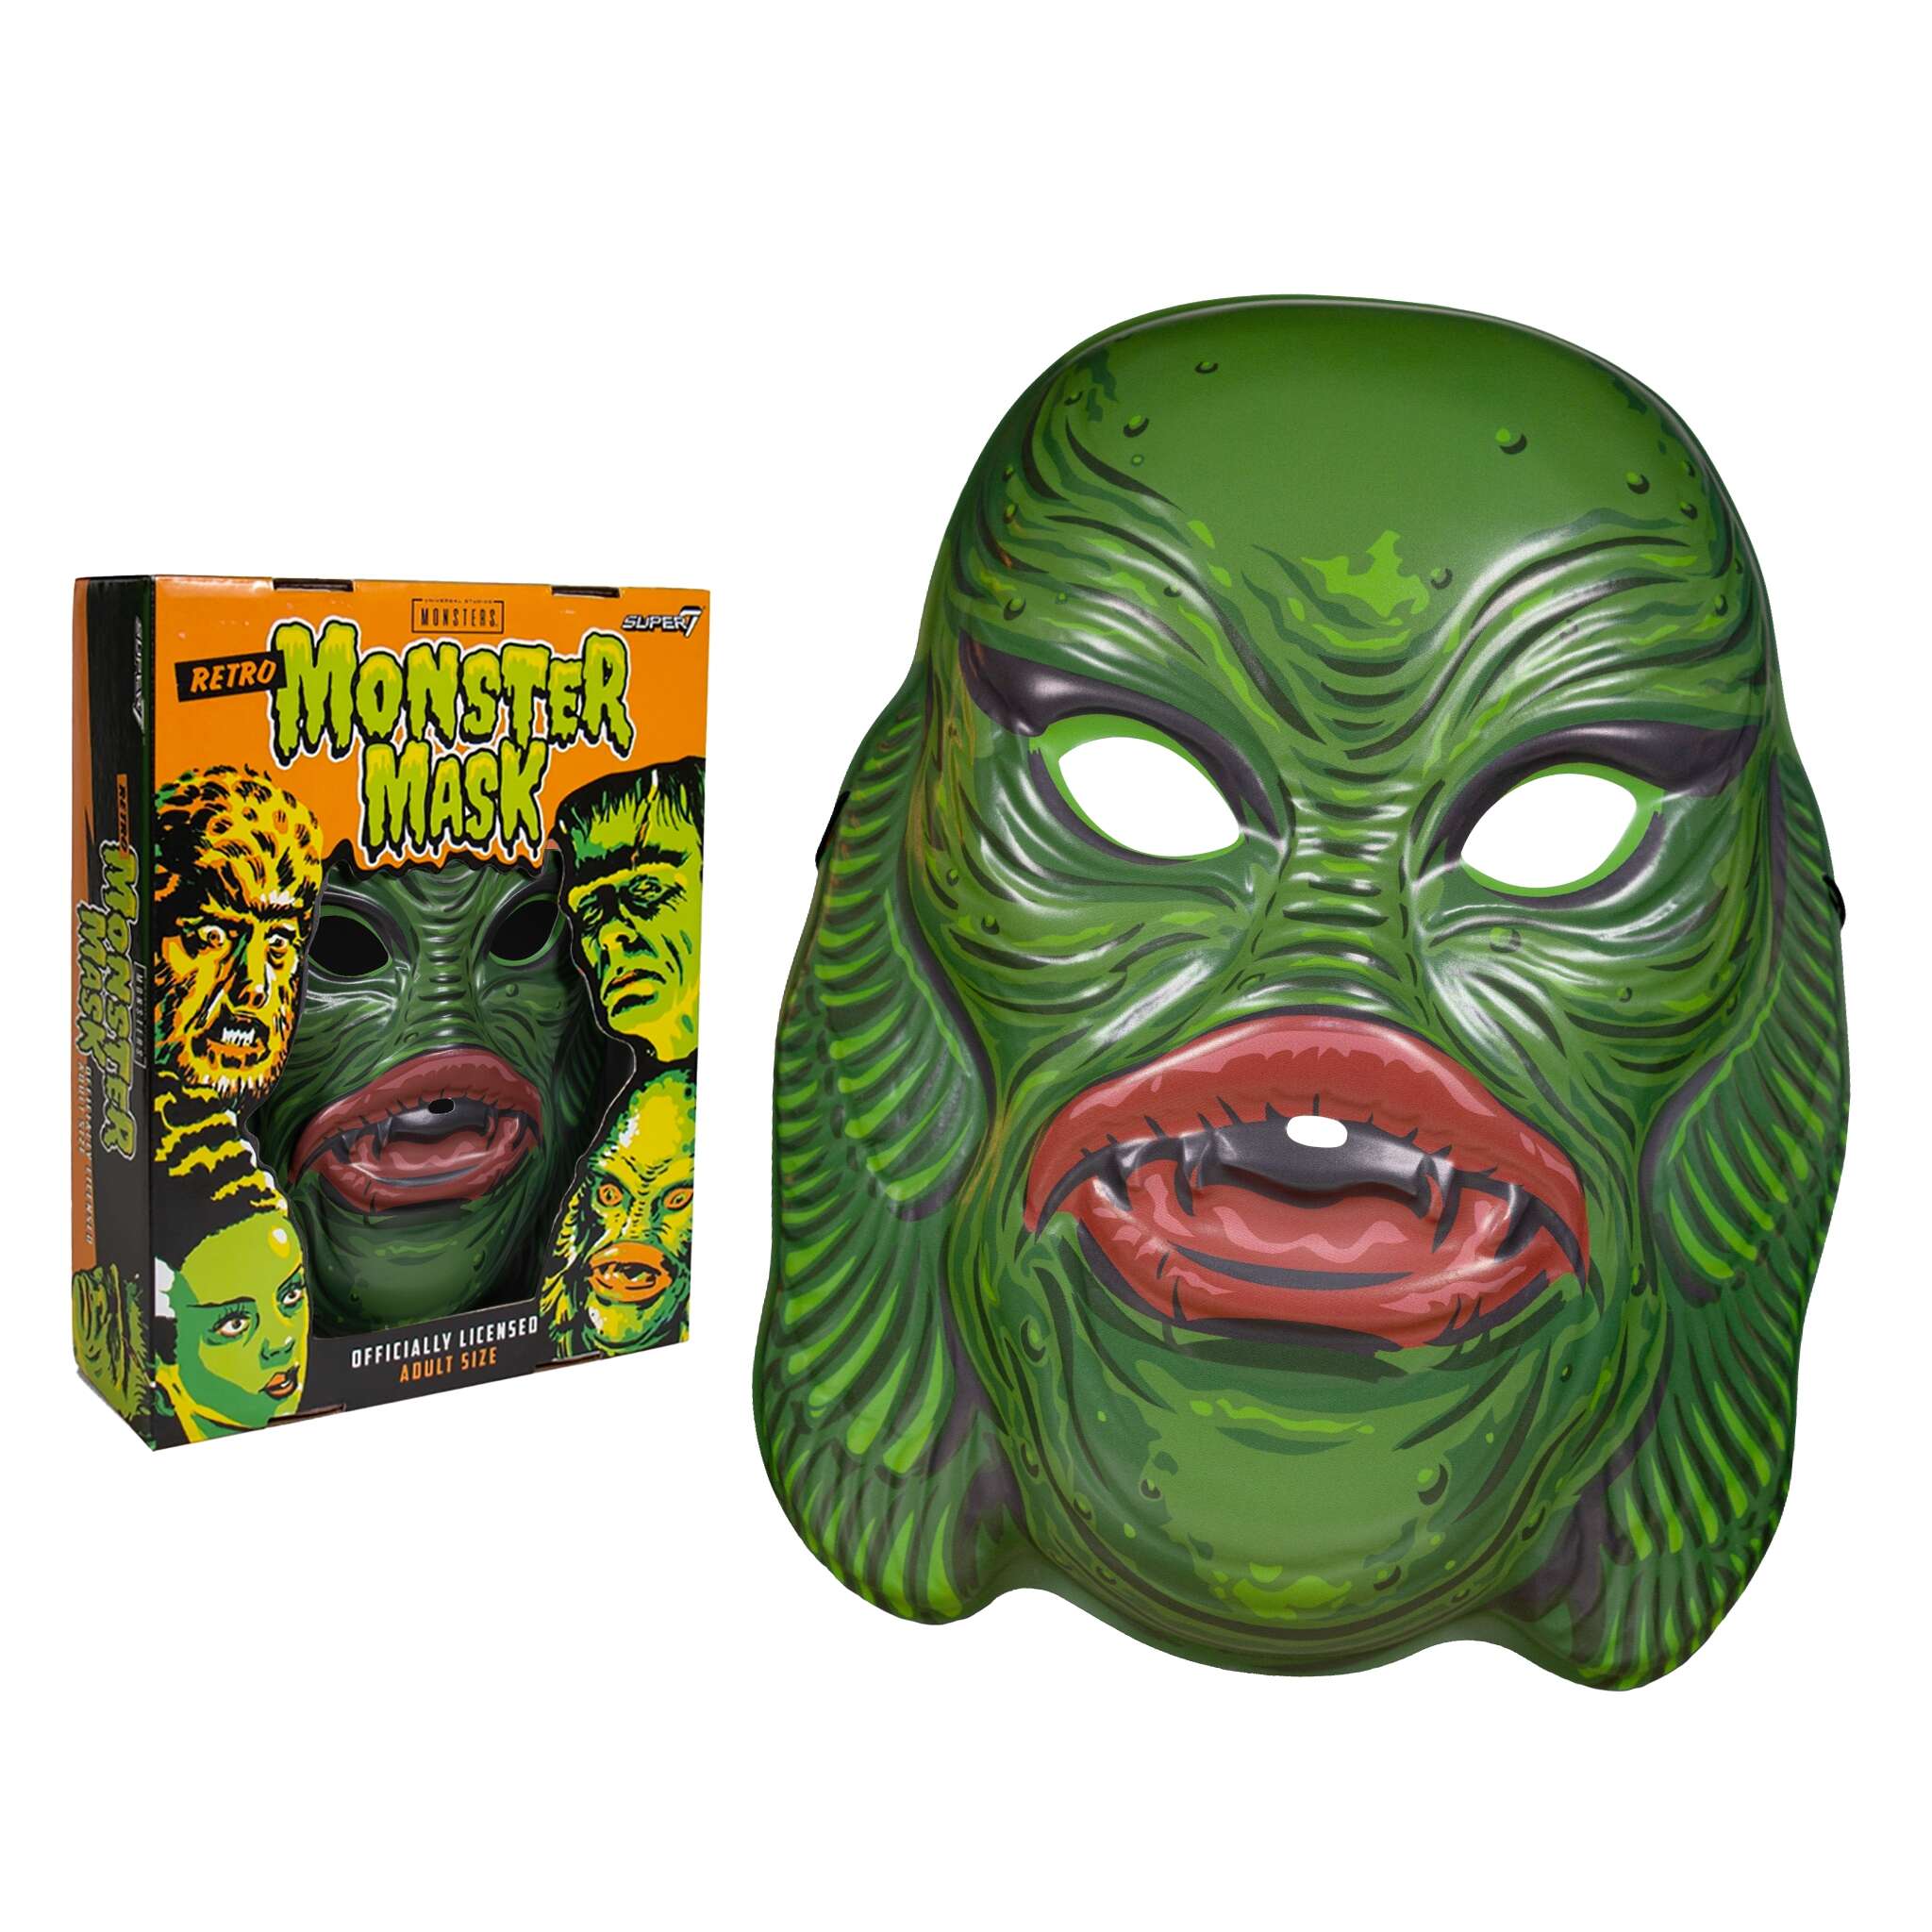 Universal Monsters Mask - Creature from the Black Lagoon (Dark Green)